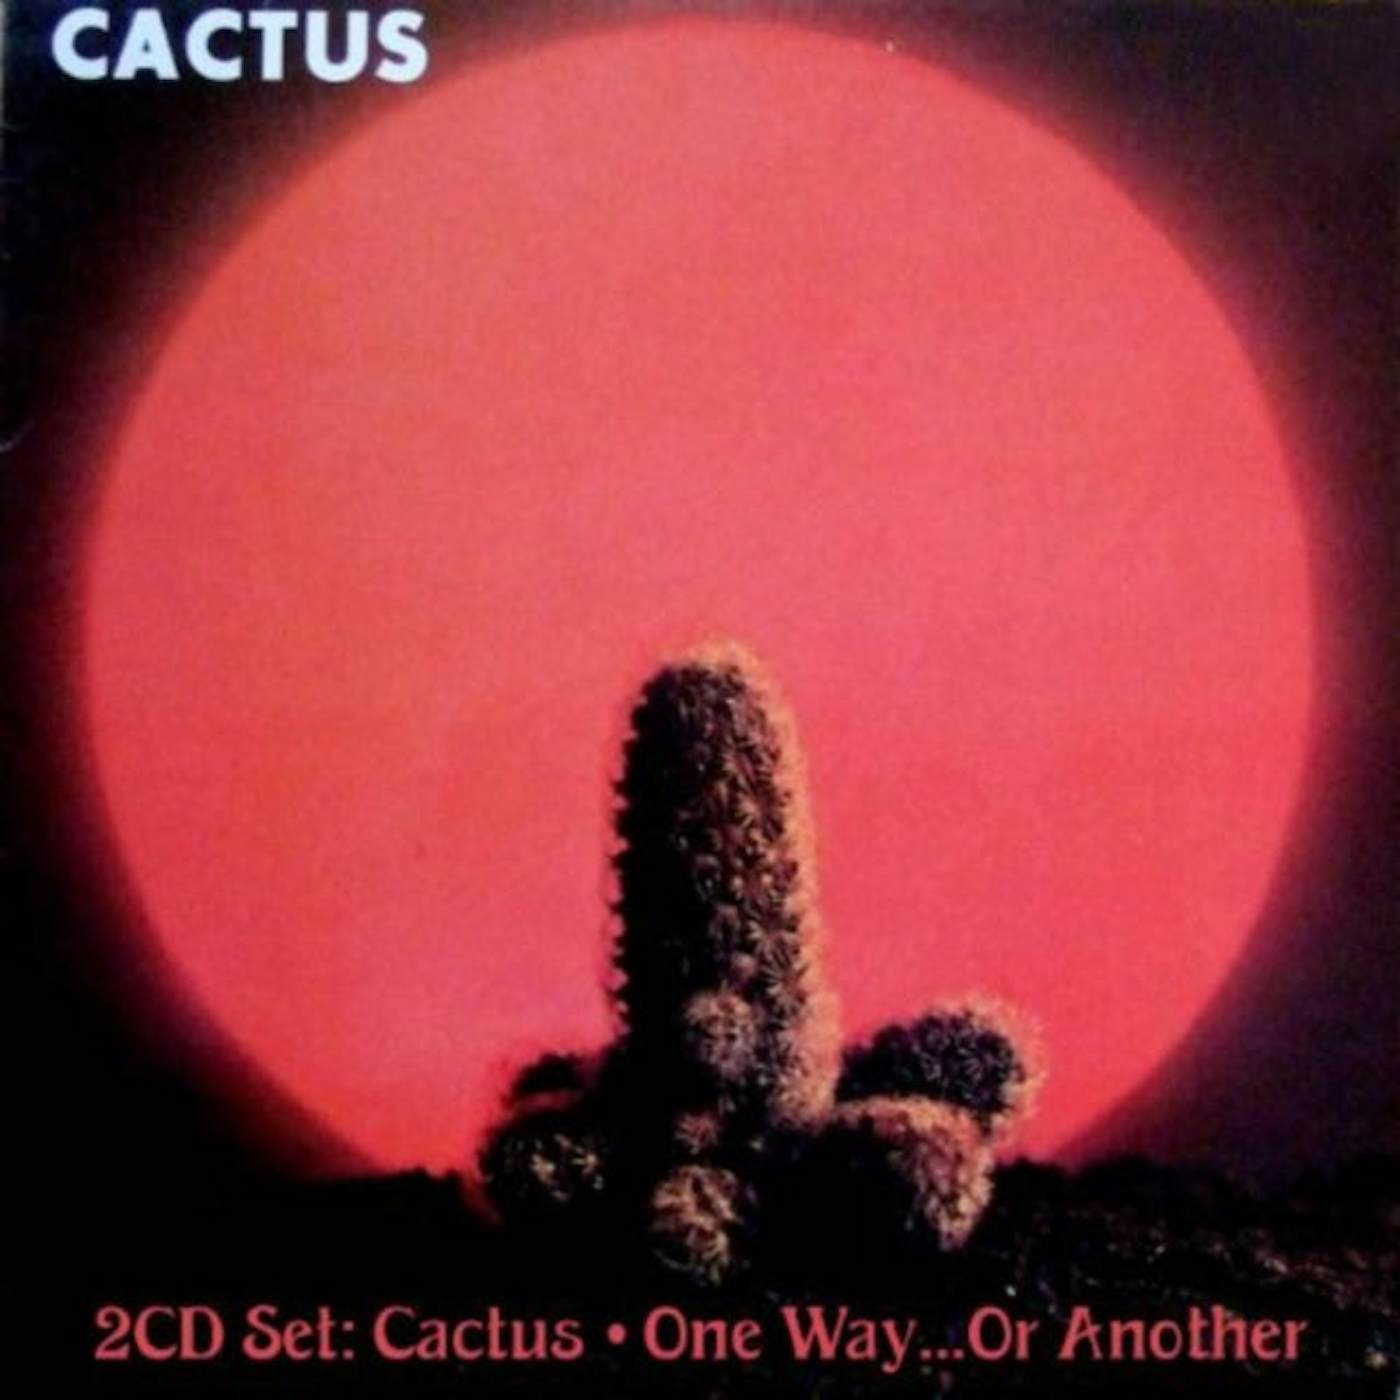 Cactus CD - Cactus/One Way Or Another